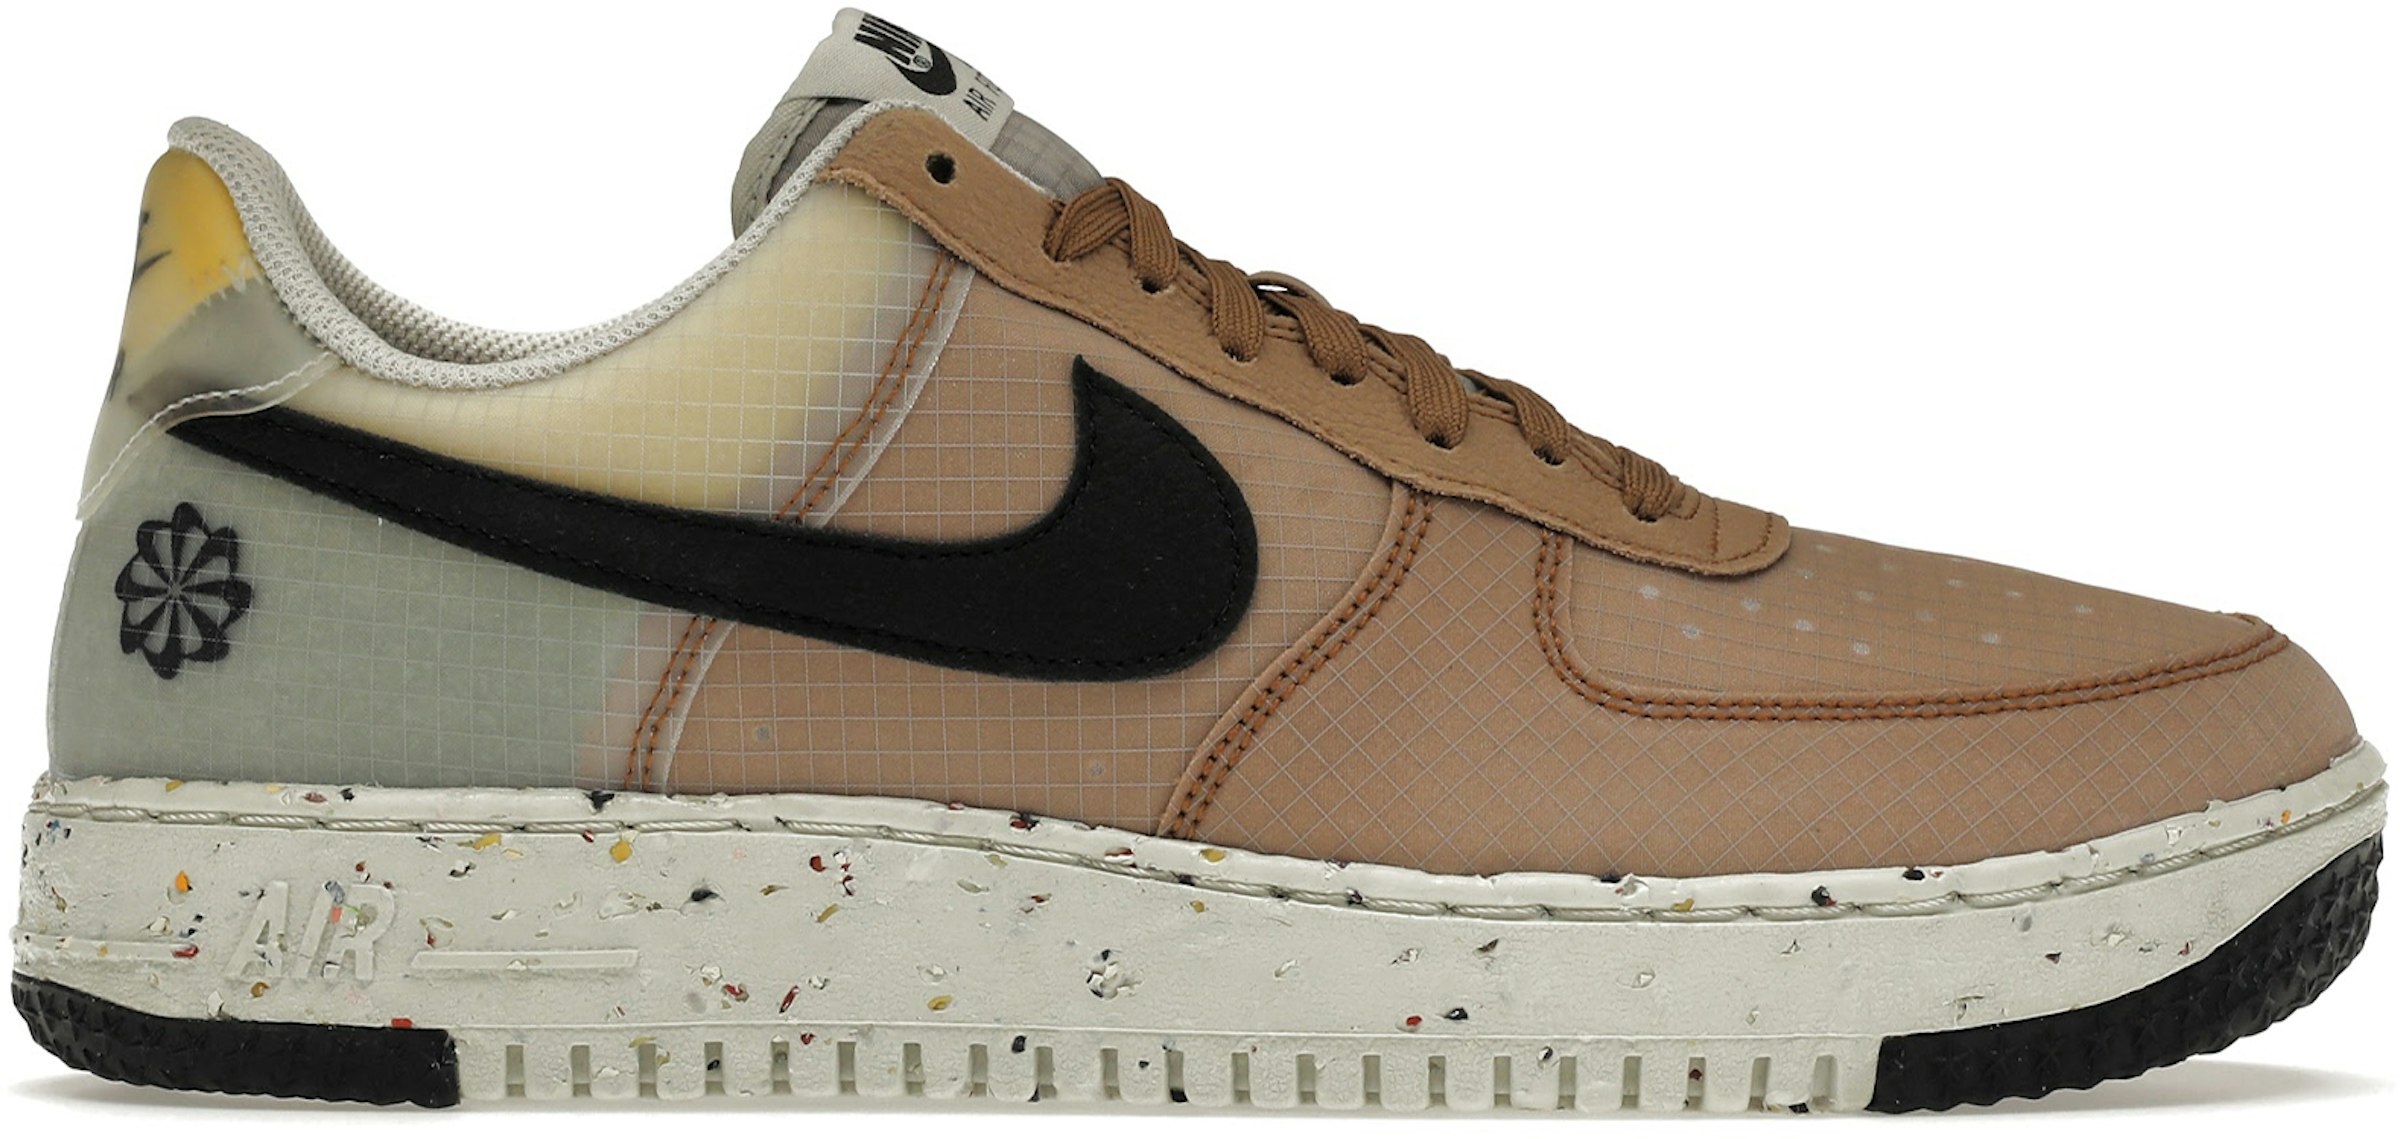 Nike Air Force Archaeo Brown Men's - DH2521-200 -